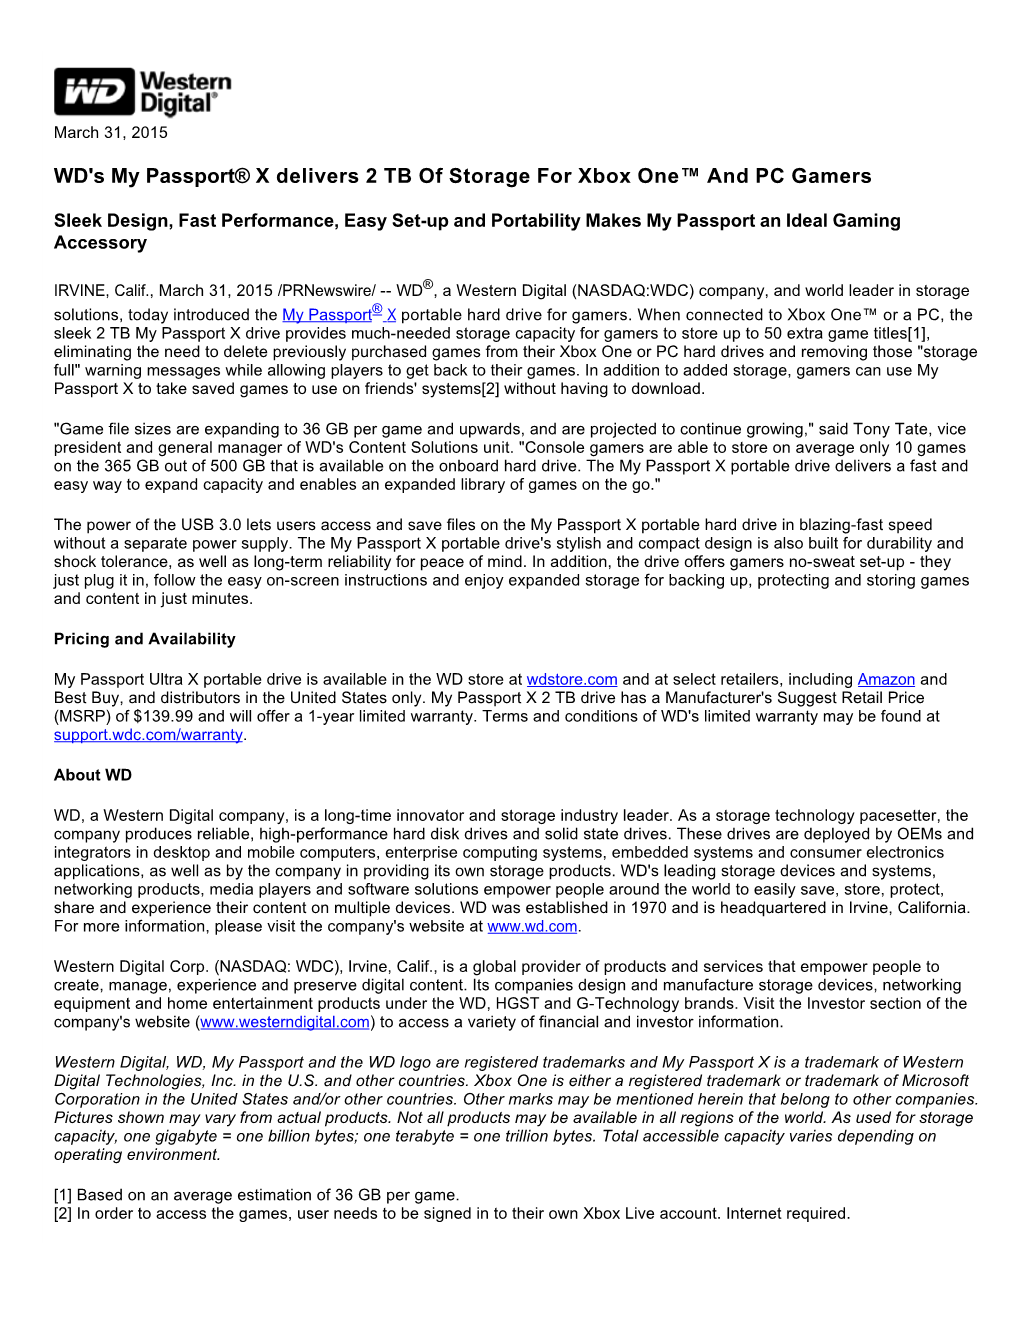 WD's My Passport® X Delivers 2 TB of Storage for Xbox One™ and PC Gamers